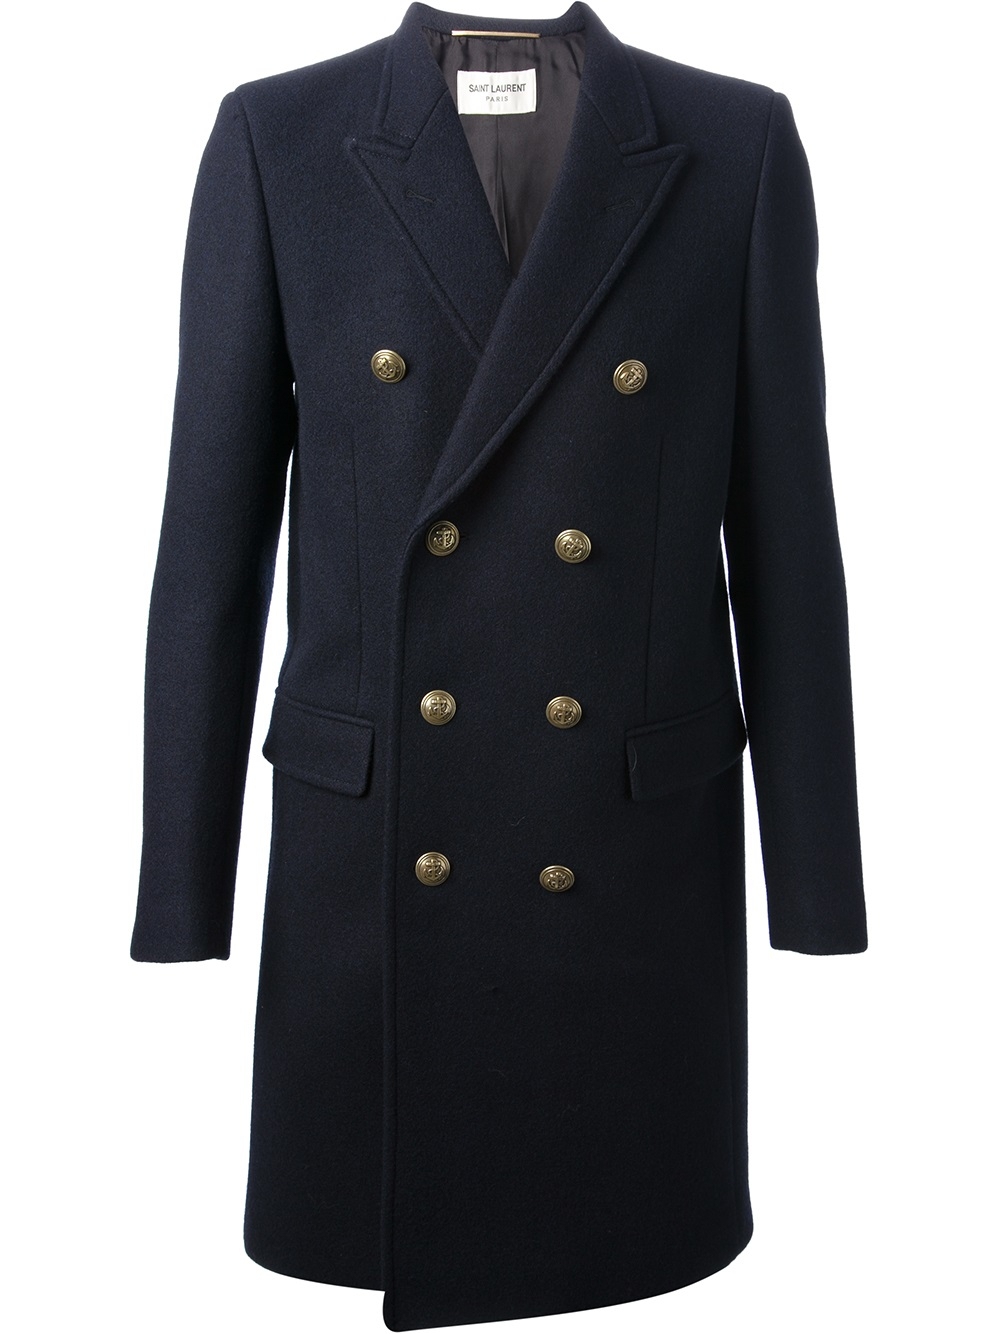 Lyst - Saint Laurent Double Breasted Coat in Blue for Men